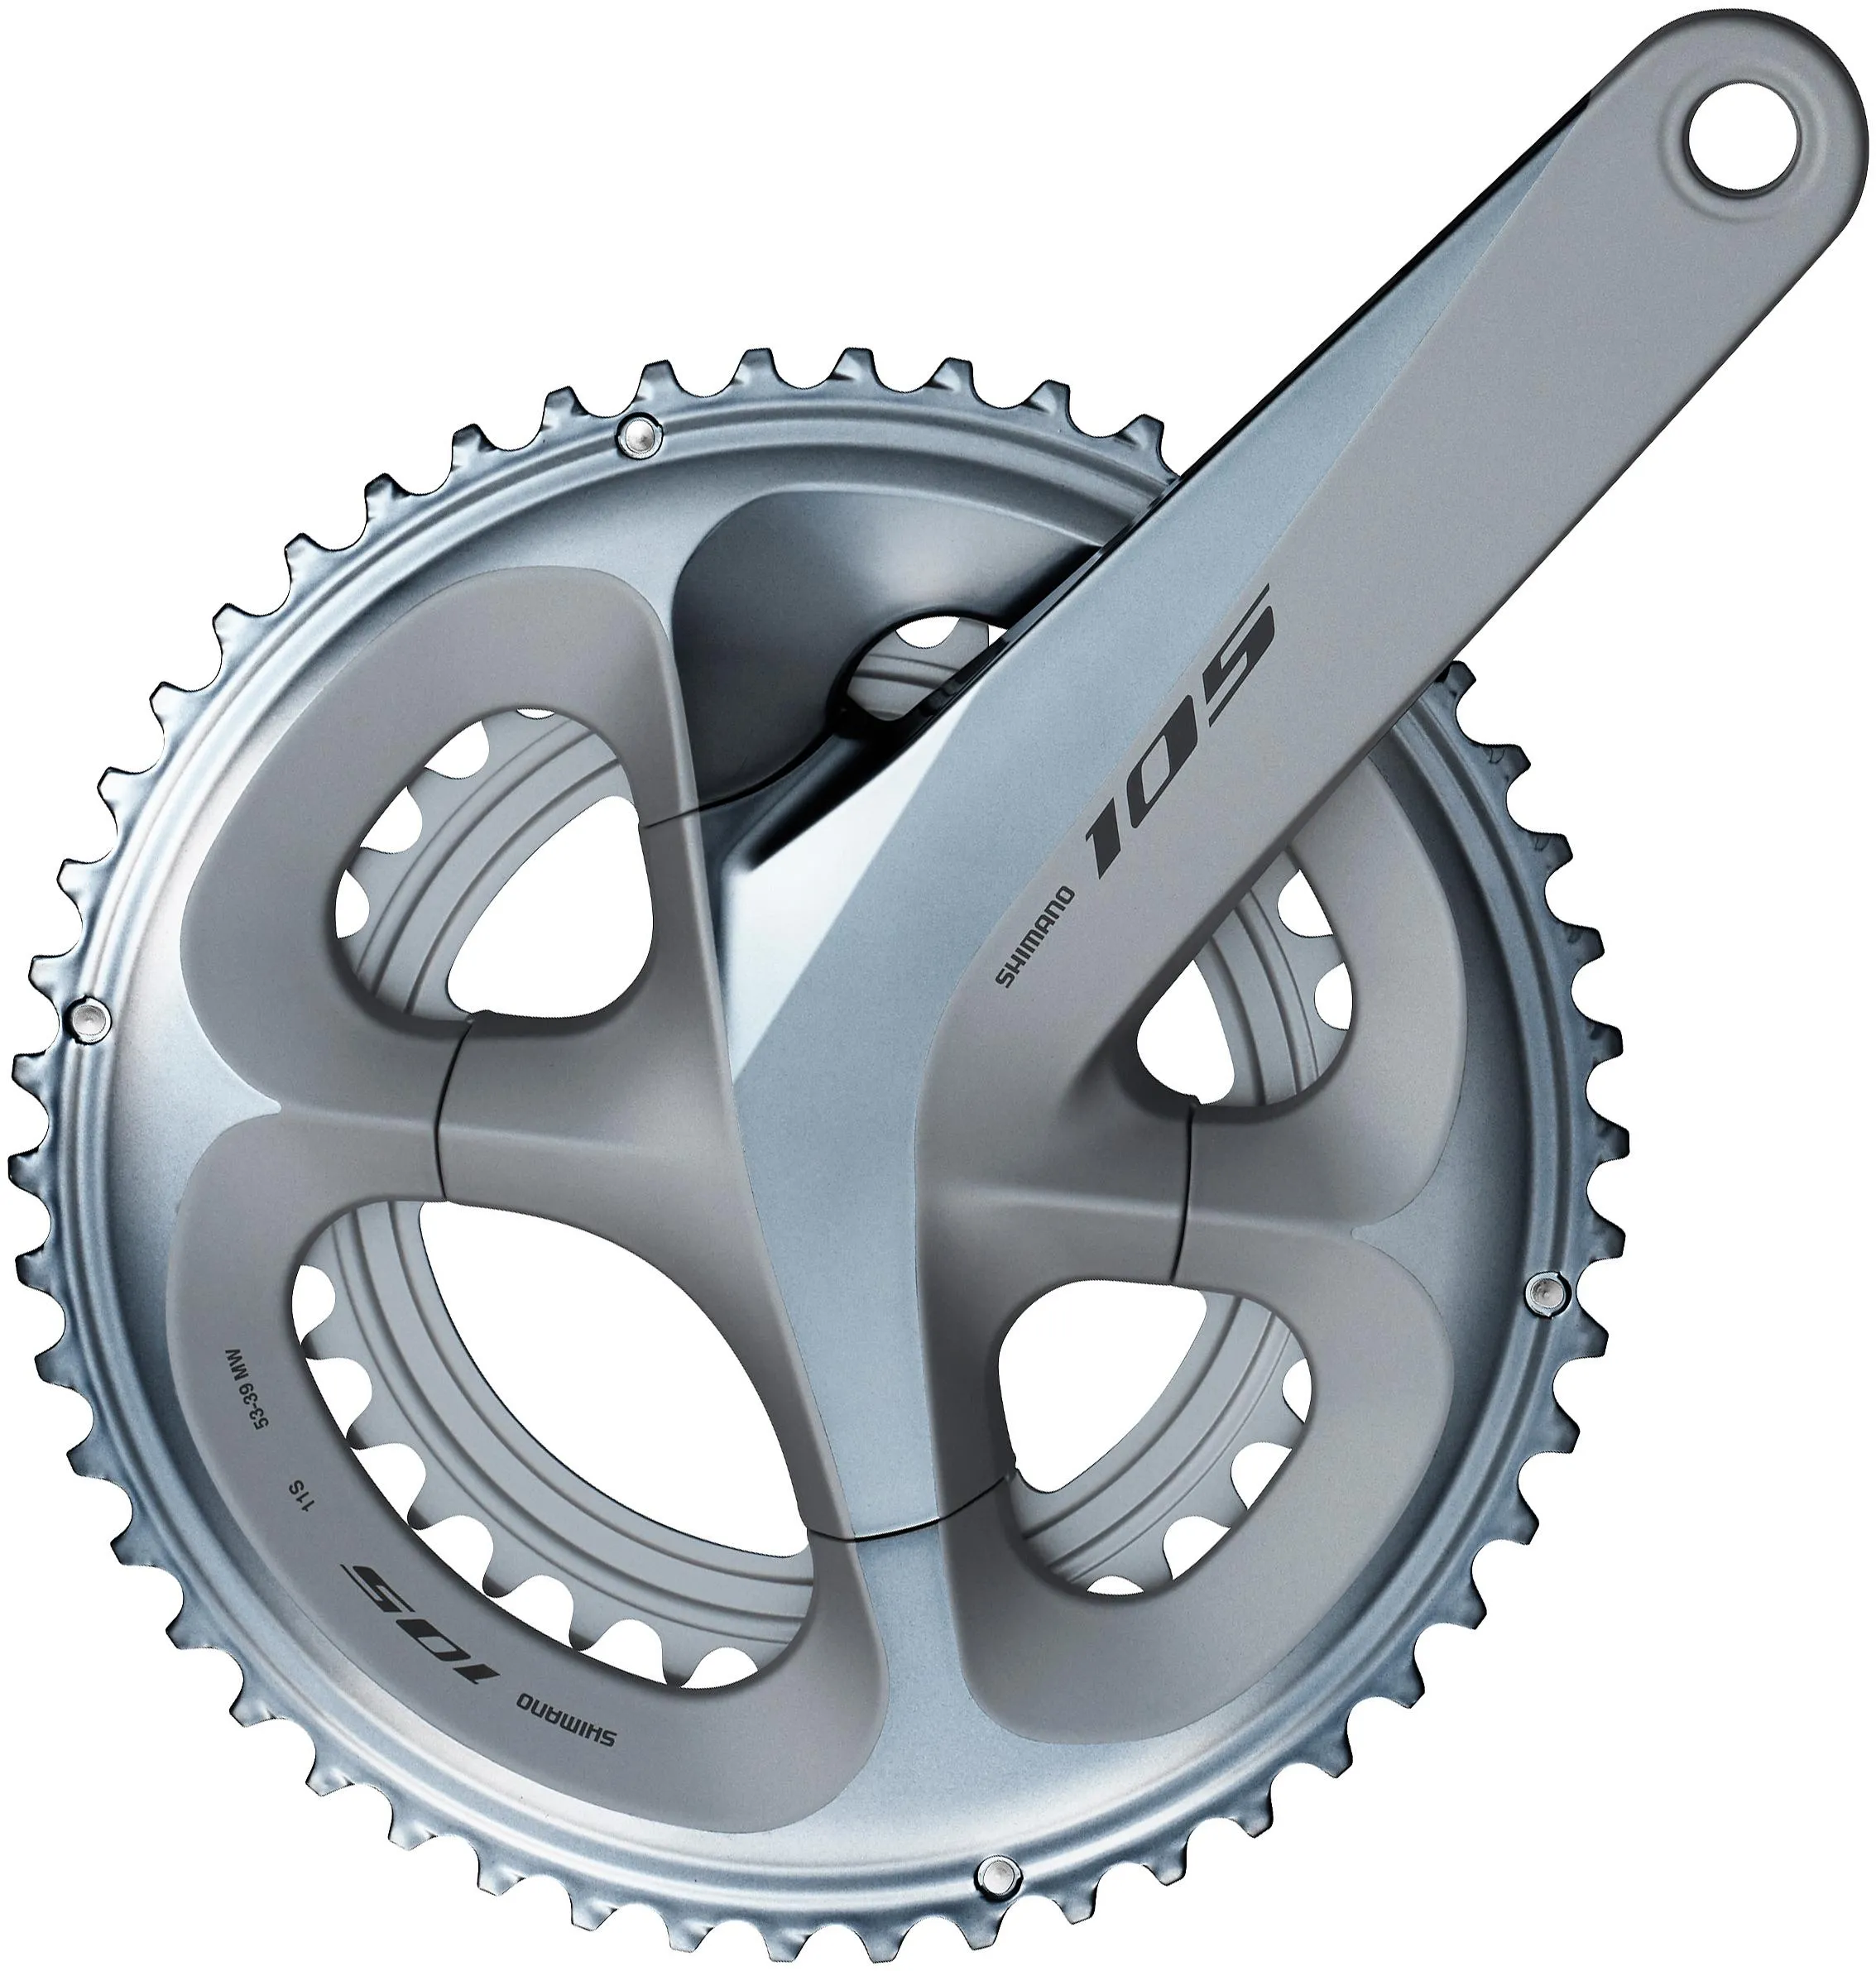  105 R7000 11 Speed Road Double Chainset, Silver